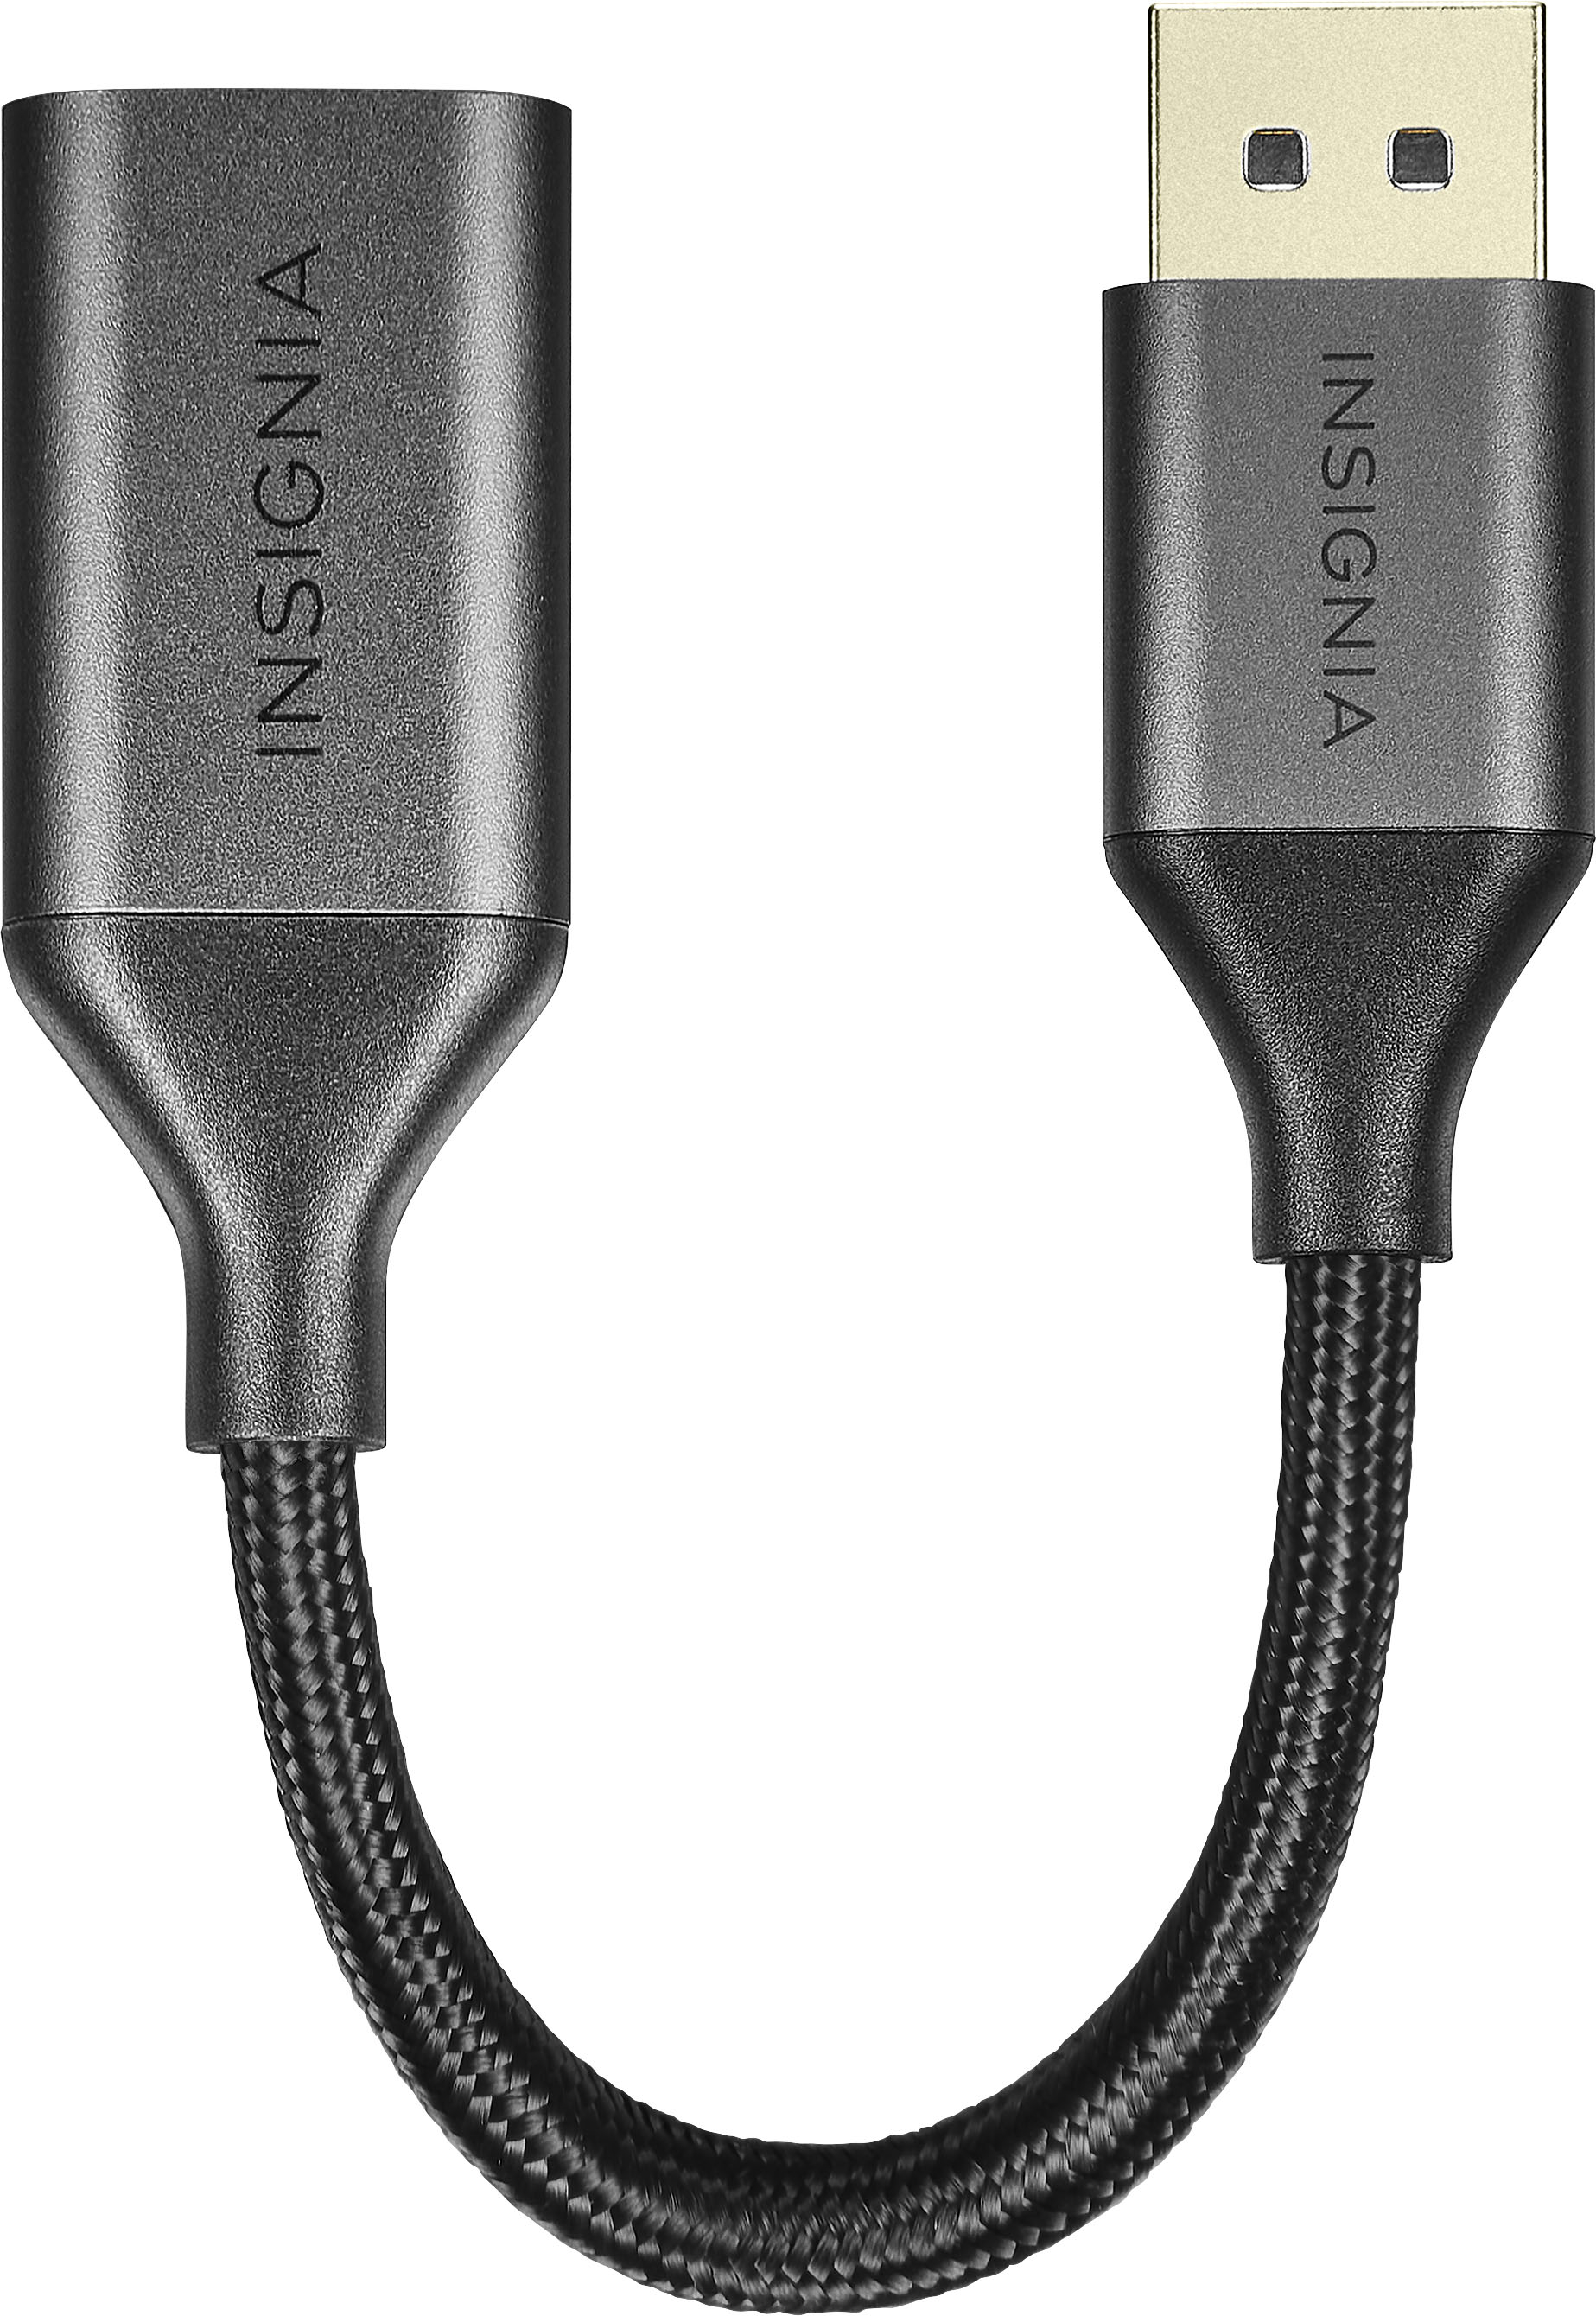 Left View: Insignia™ - DisplayPort to HDMI Adapter - Black